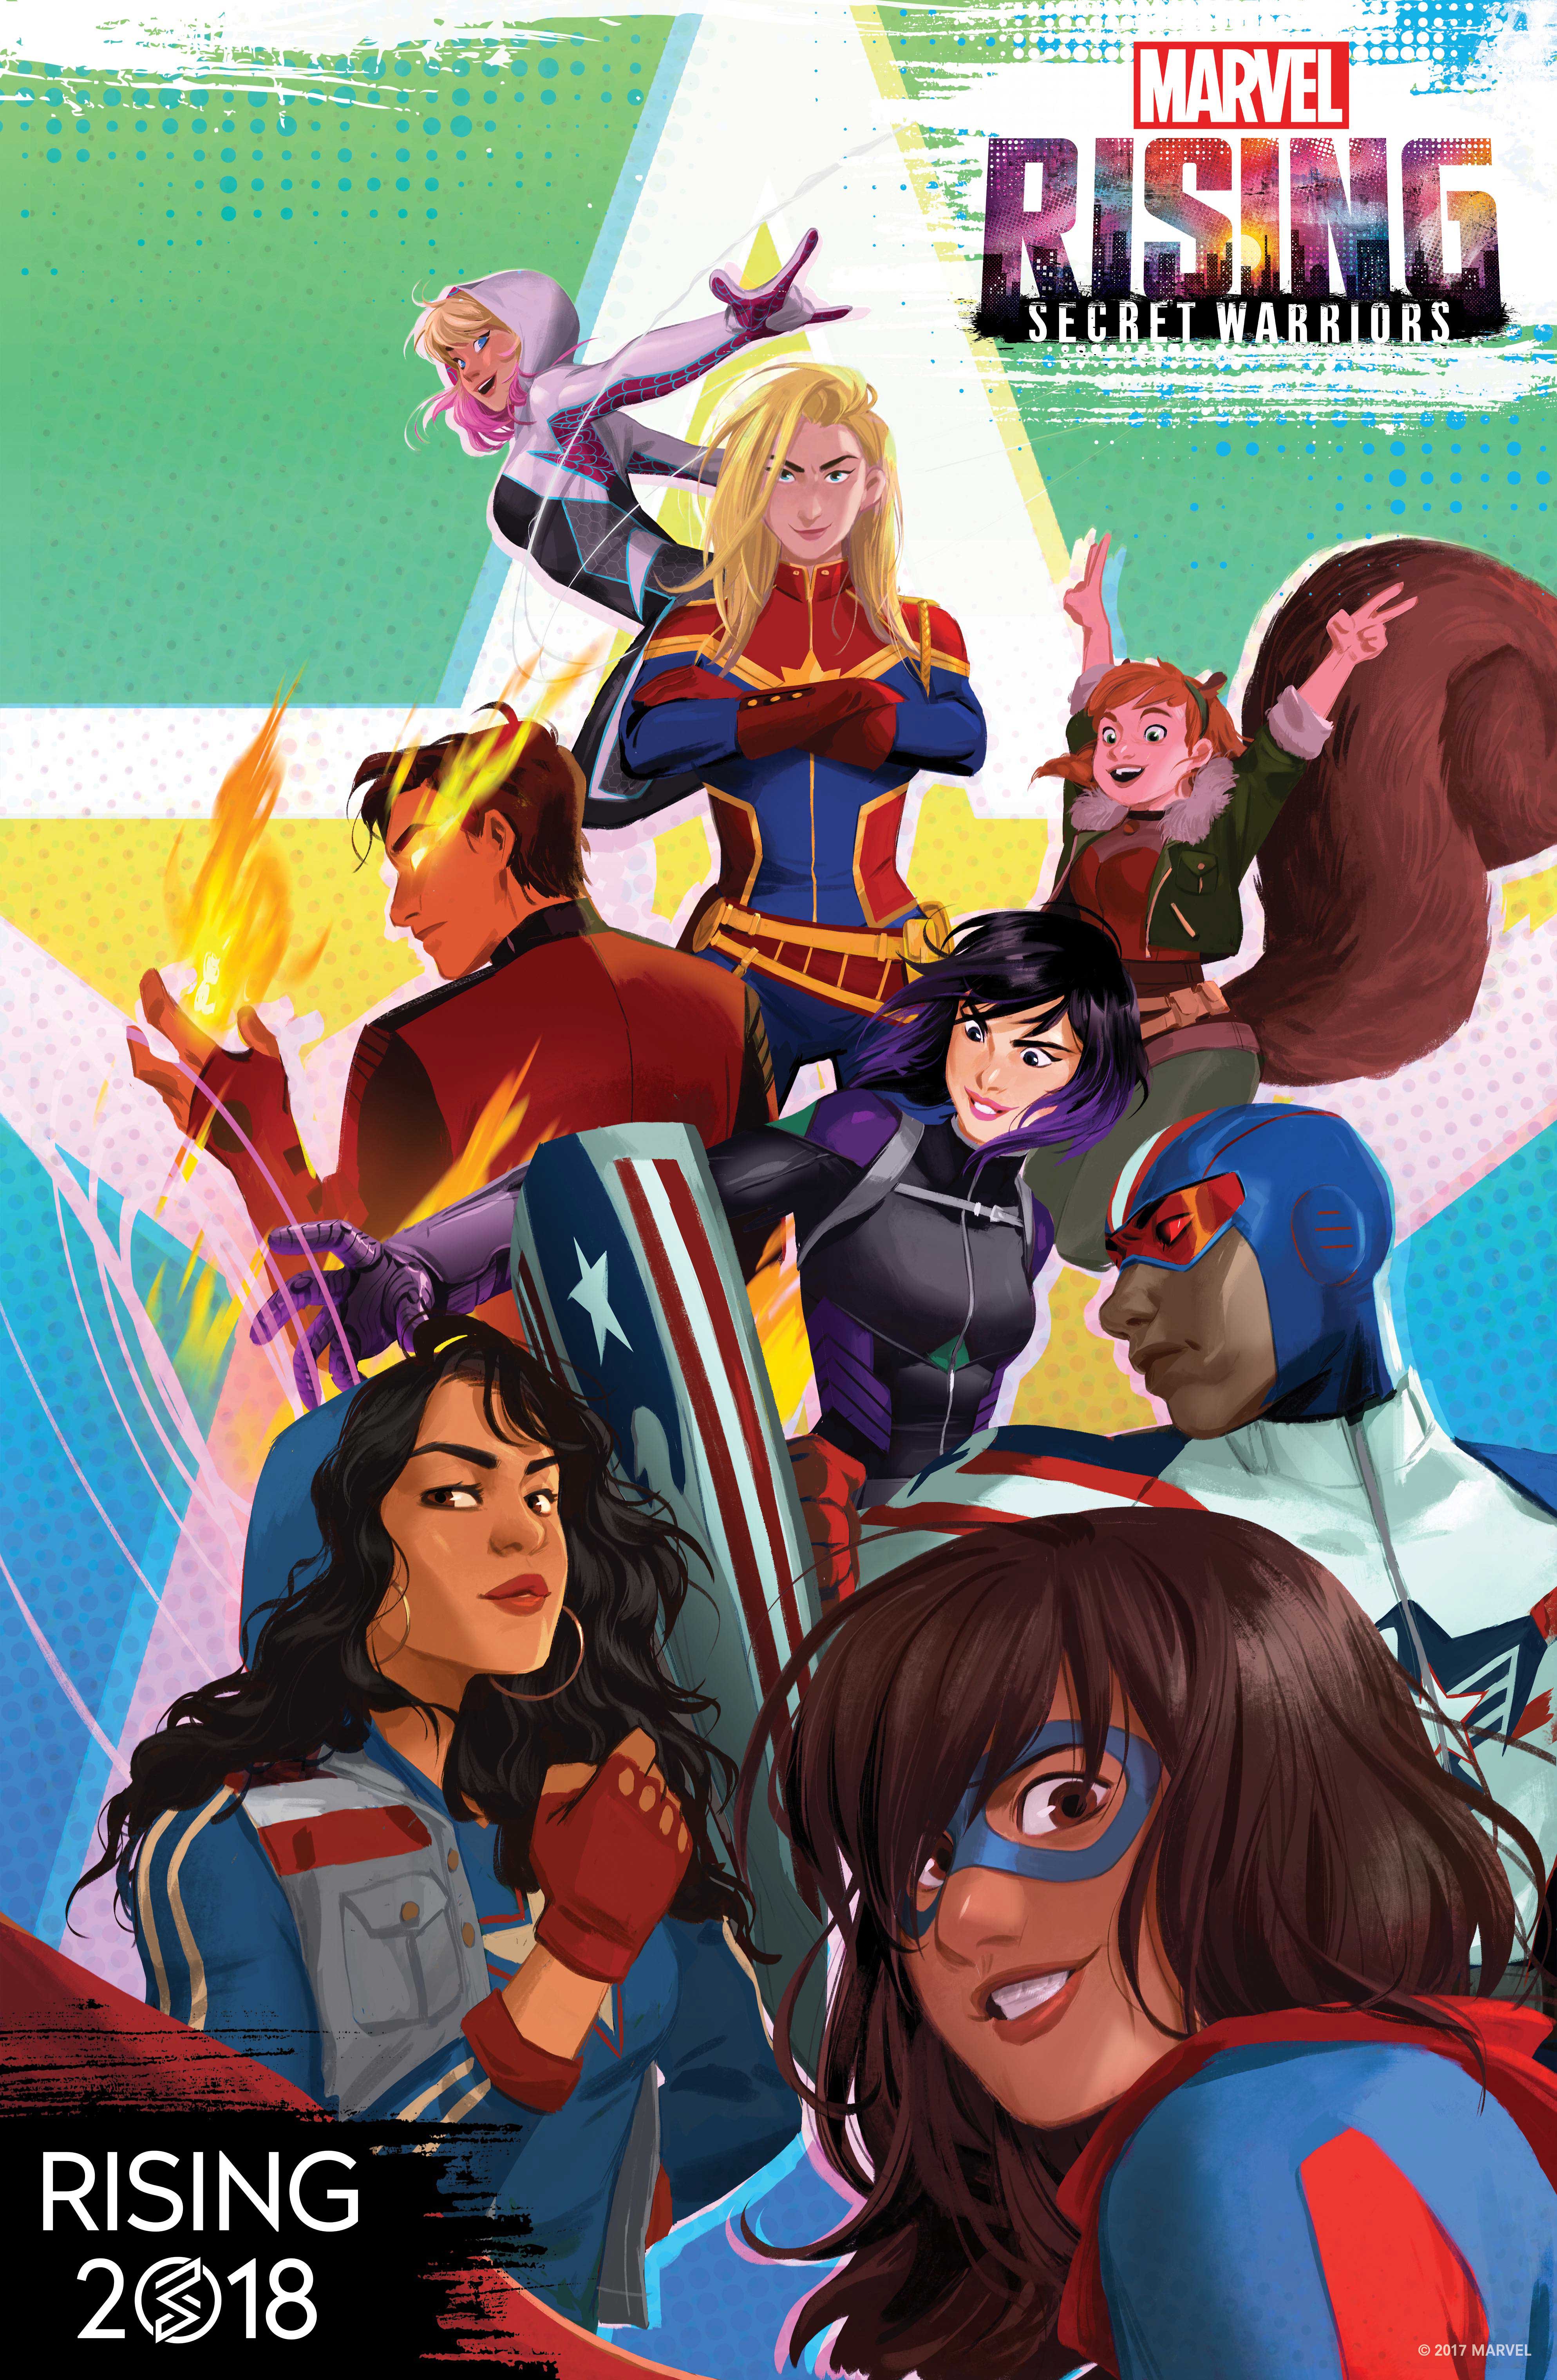 Video] Marvel announces Marvel Rising animation franchise — Major Spoilers  — Comic Book Reviews, News, Previews, and Podcasts